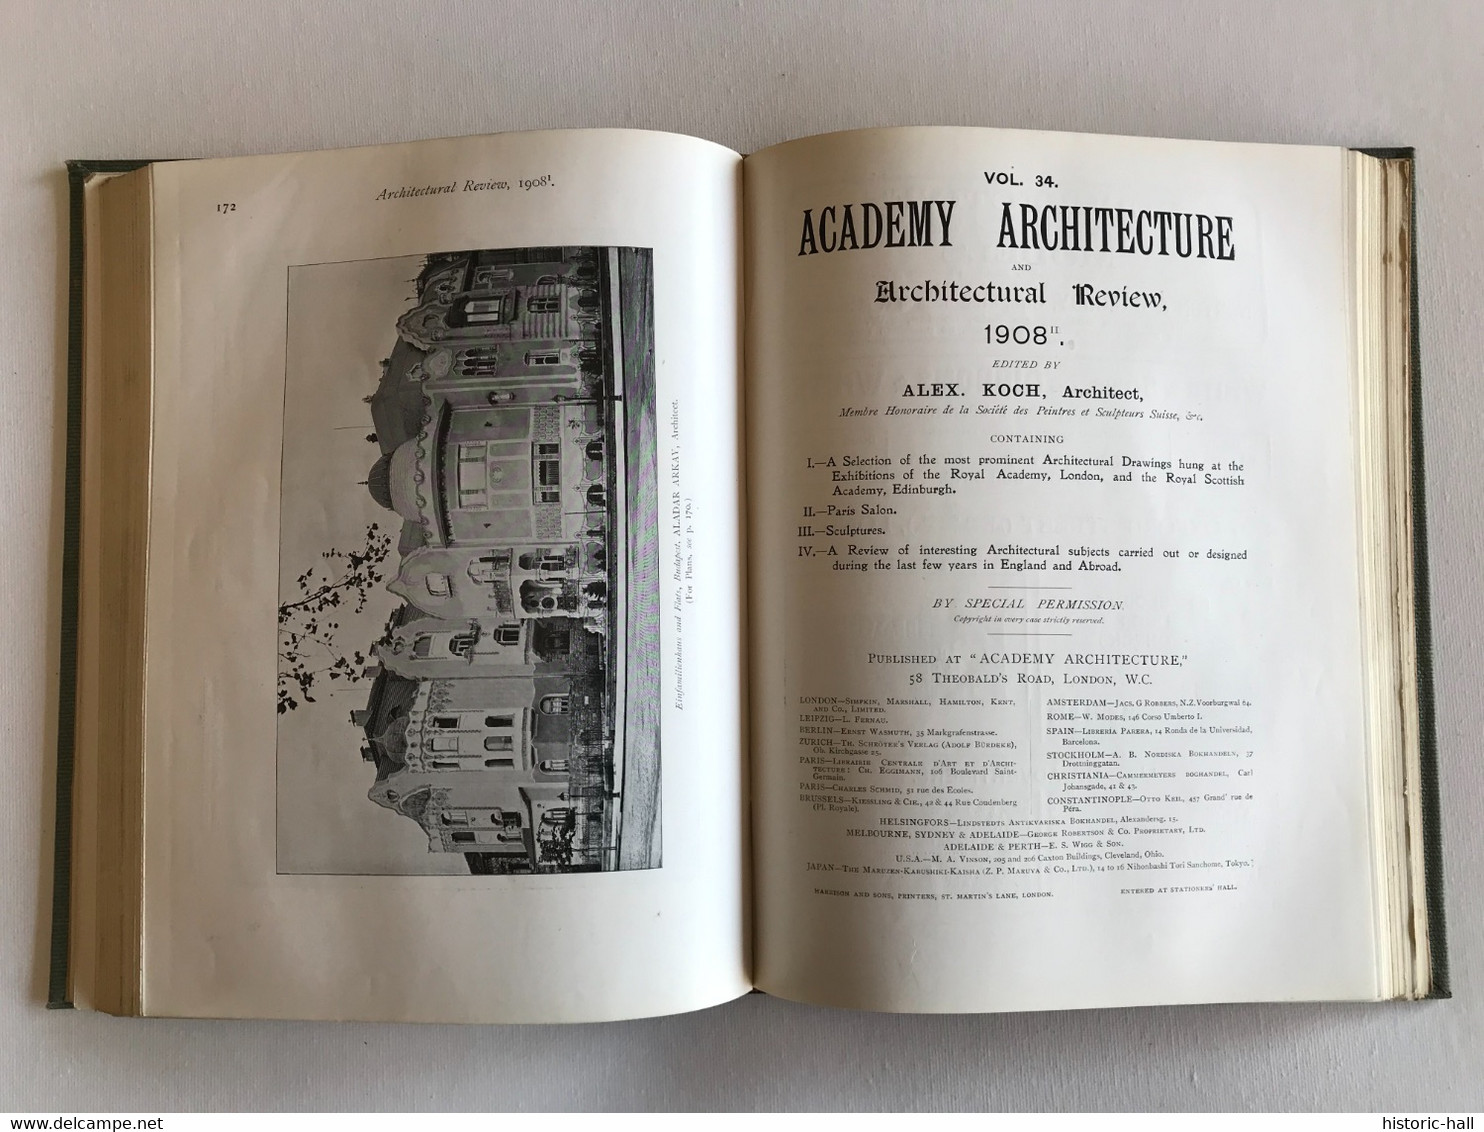 ACADEMY ARCHITECTURE & Architectural Review - vol 33 & 34 - 1908 - Alexander KOCH